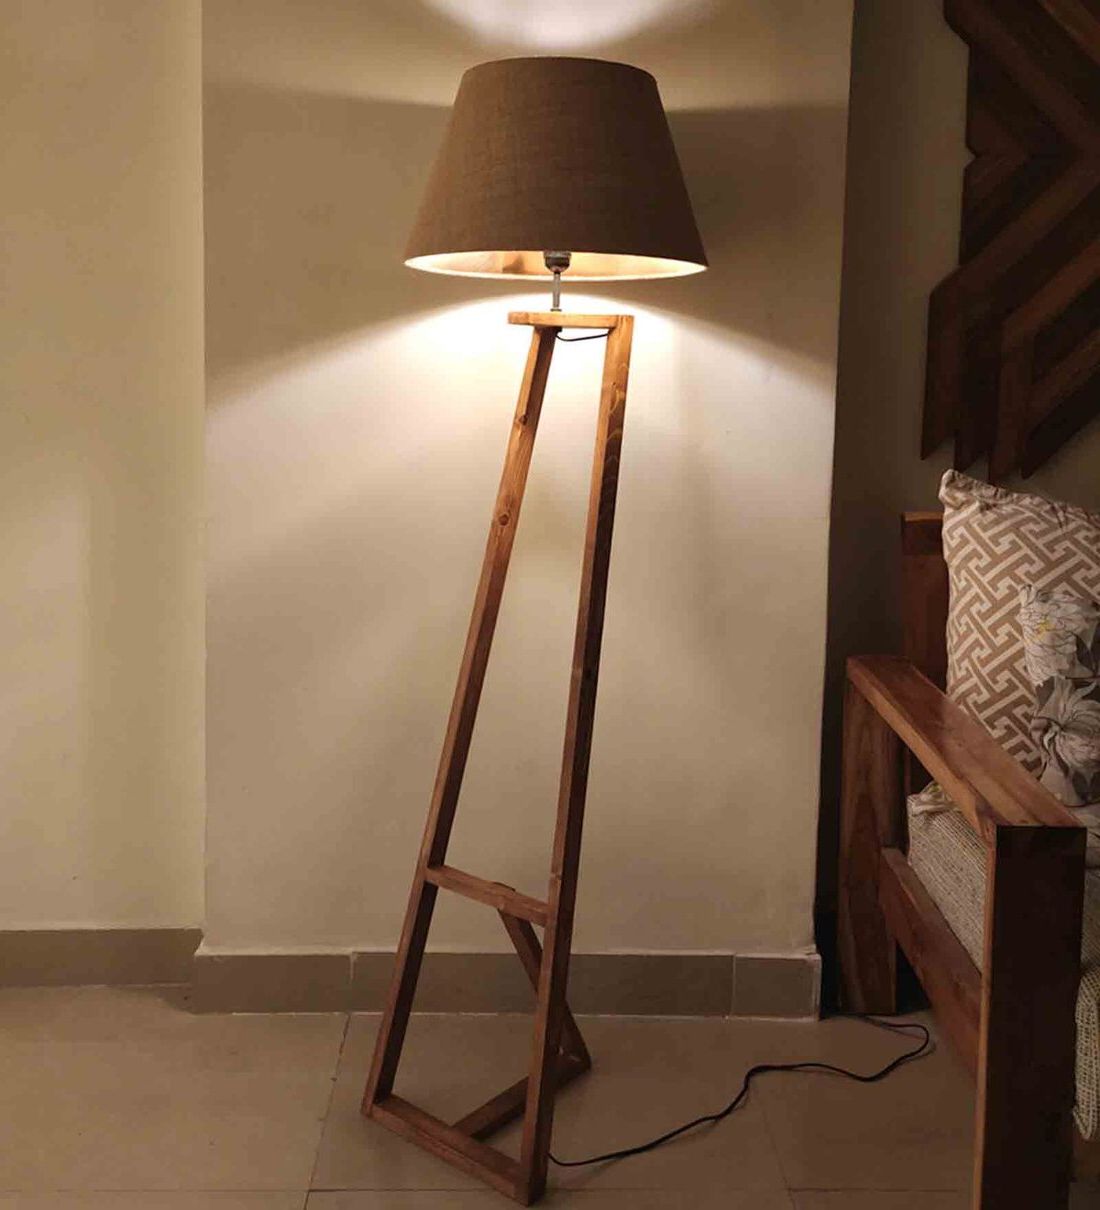 Buy Angular Brown Wooden Floor Lampsymplify Interio Online – Eclectic Floor  Lamps – Floor Lamps – Lamps And Lighting – Pepperfry Product Throughout Angular Floor Lamps (View 15 of 20)